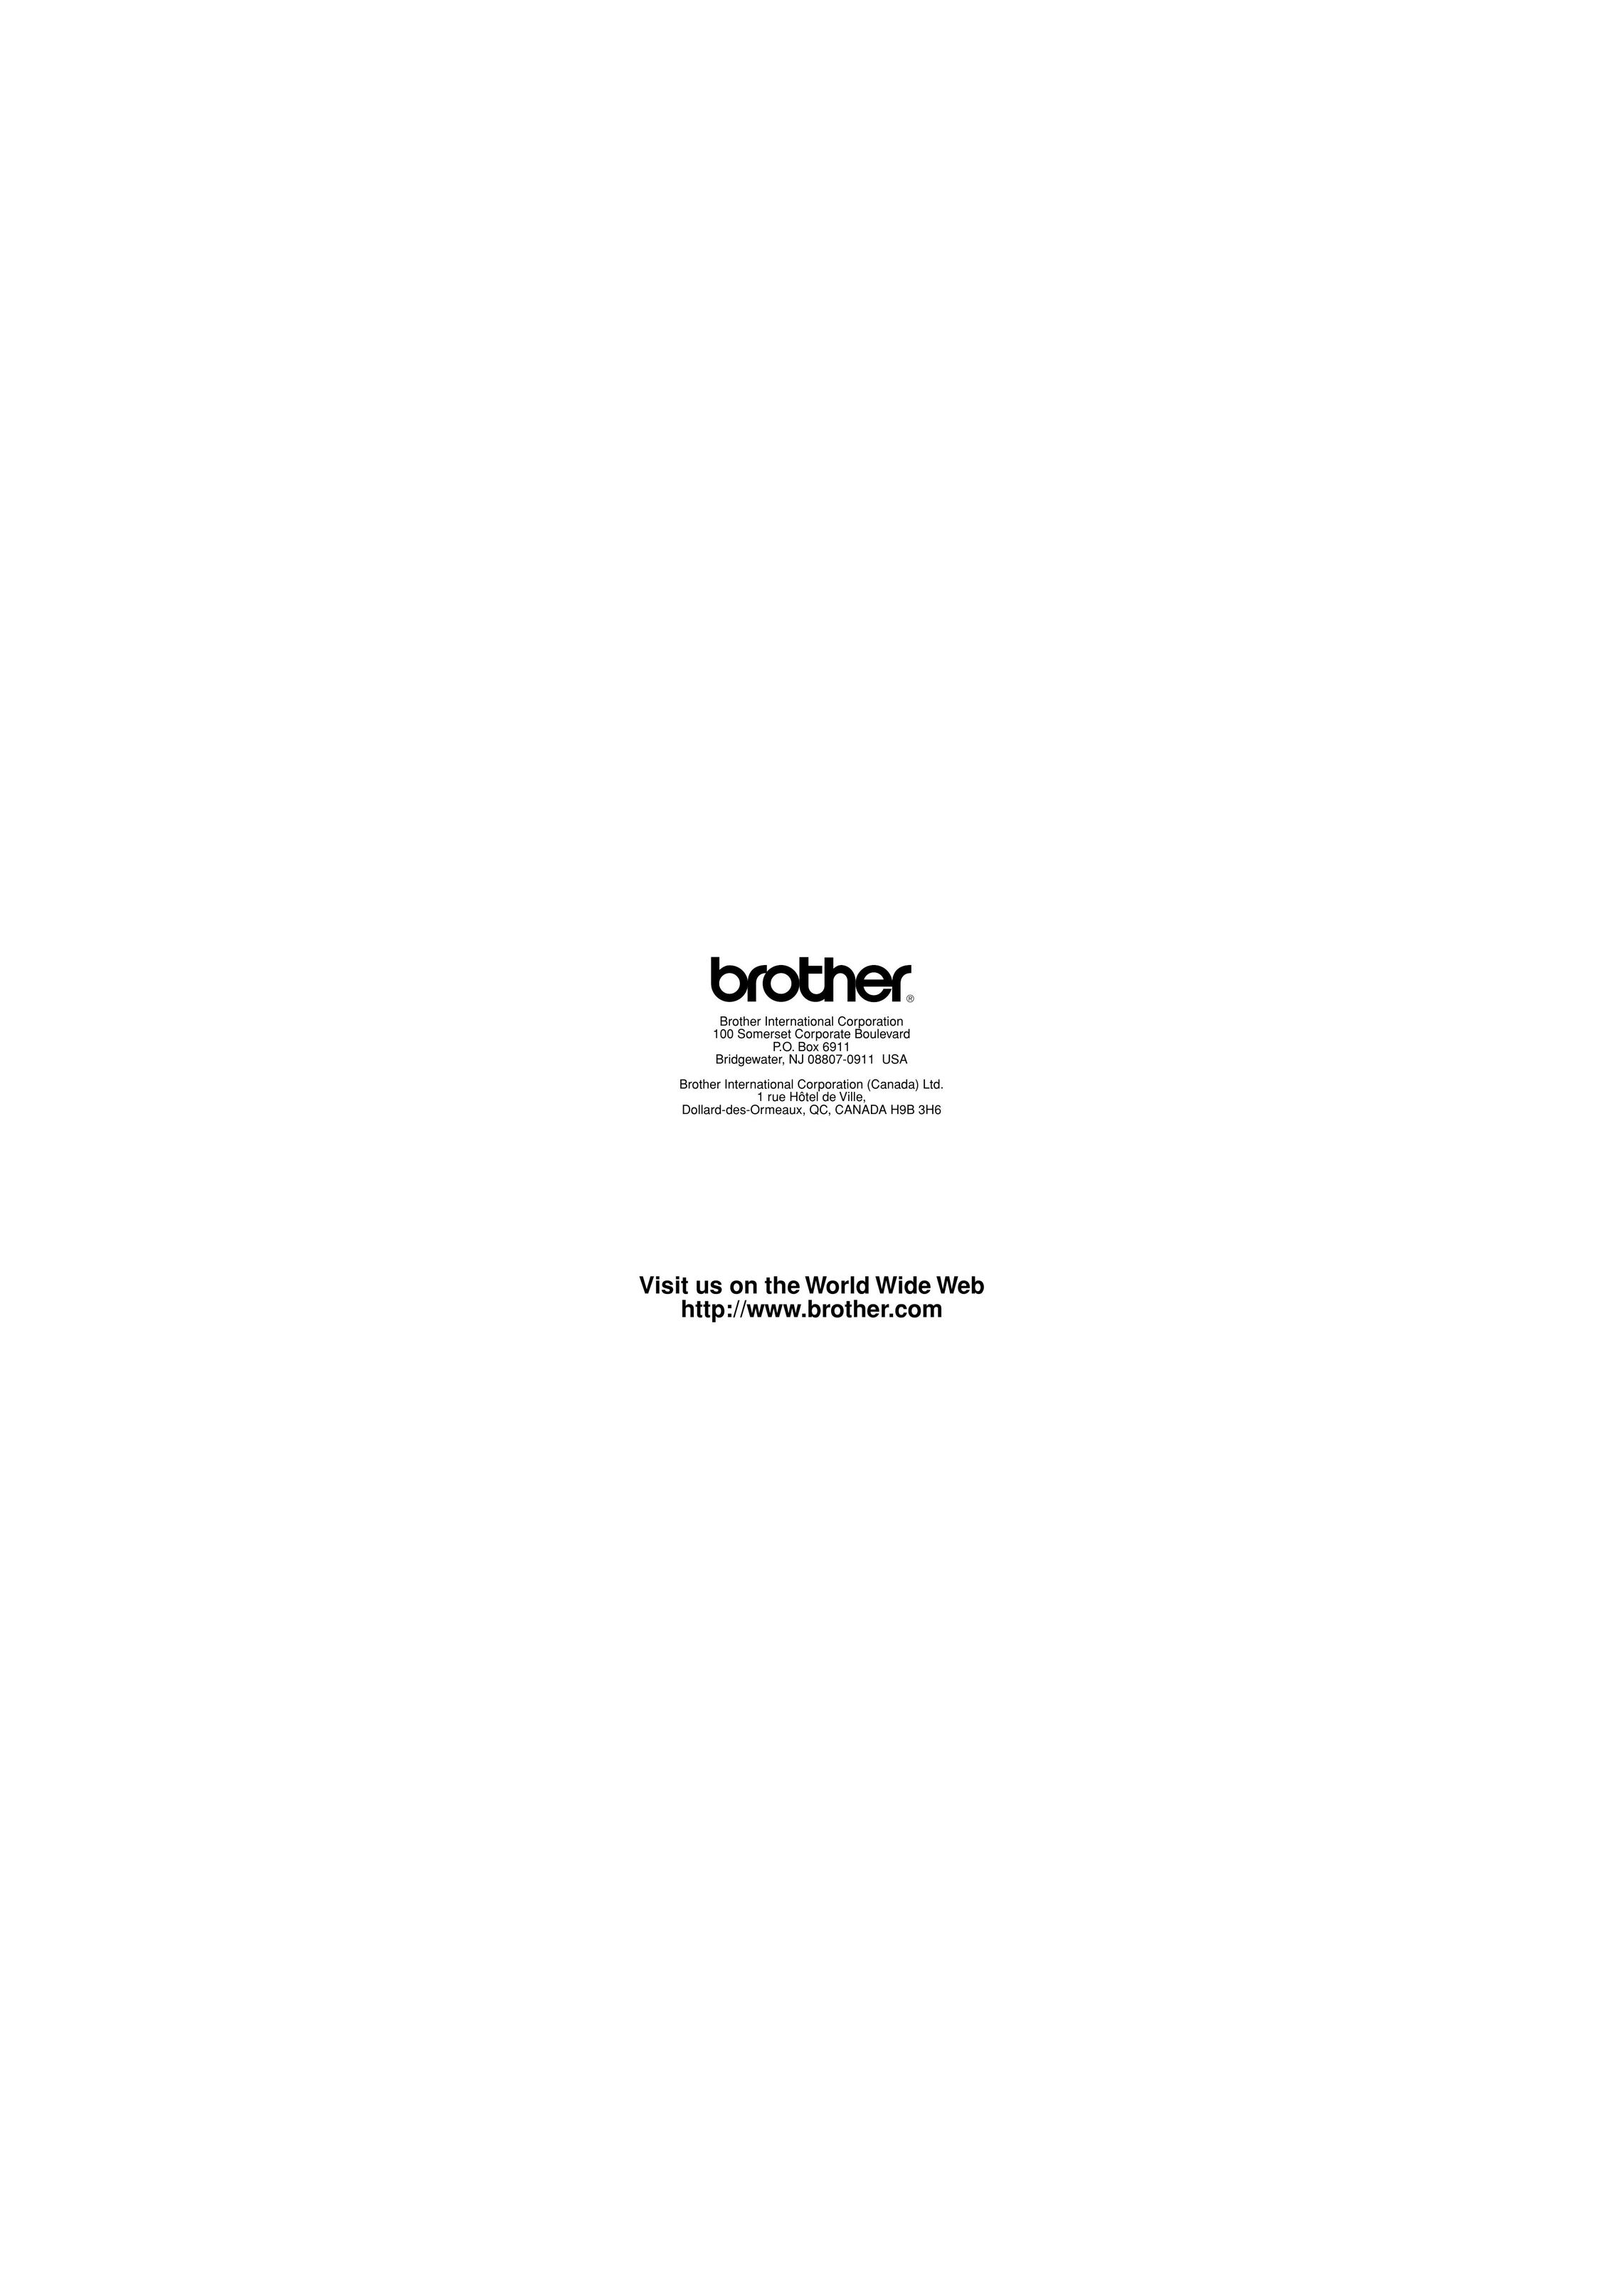 Brother 1800C All in One Printer User Manual